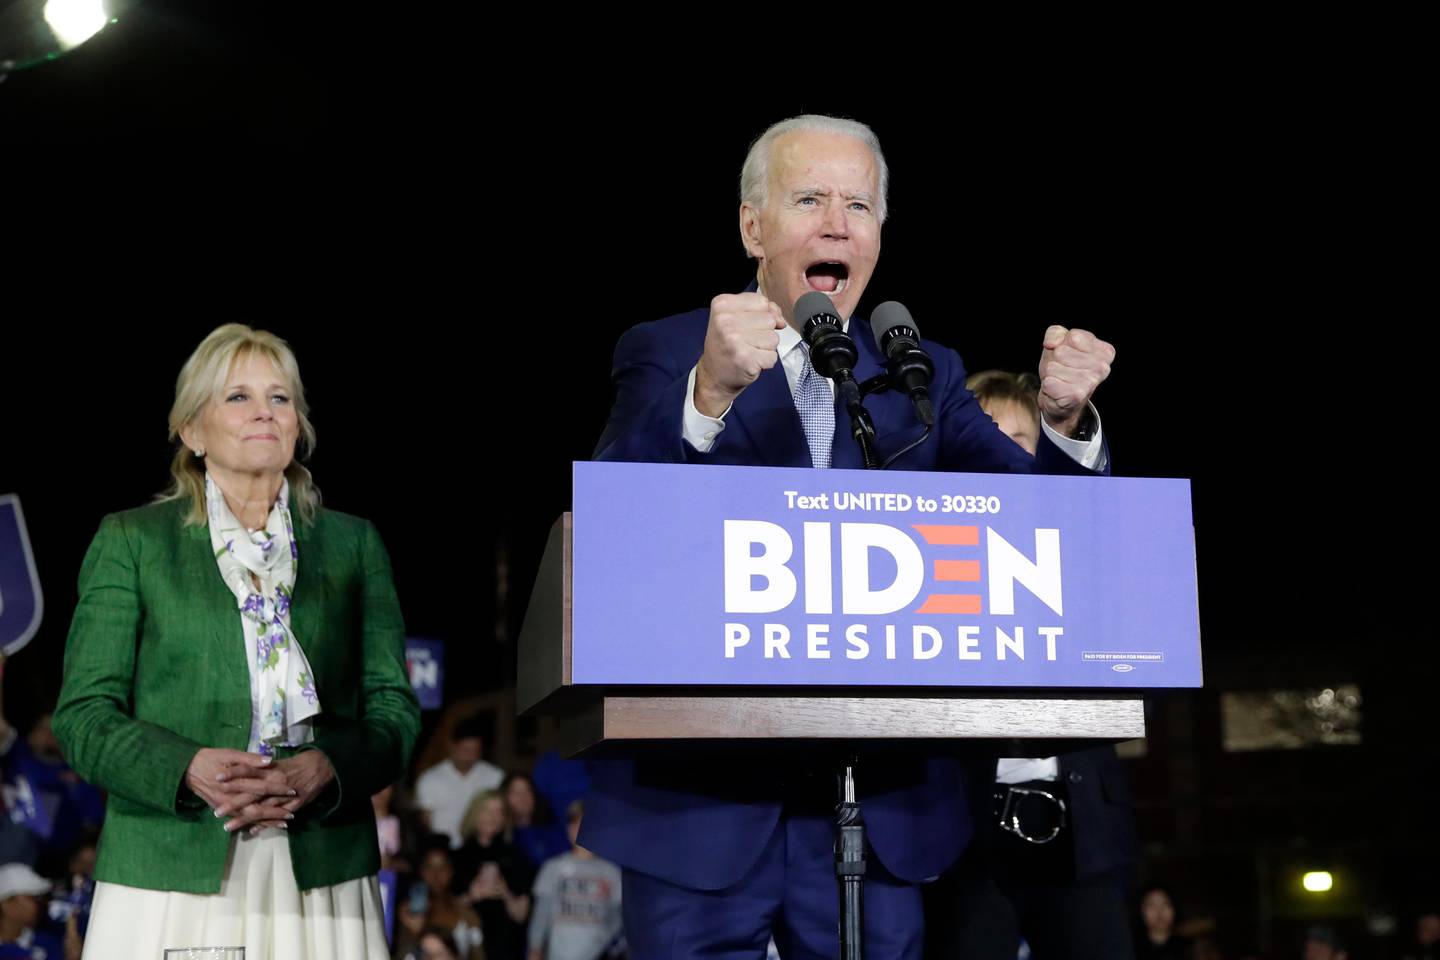 Democratic presidential candidate former Vice President Joe Biden, right, speaks next to his wife Jill during a primary election night rally Tuesday, March 3, 2020, in Los Angeles. (AP Photo/Marcio Jose Sanchez)